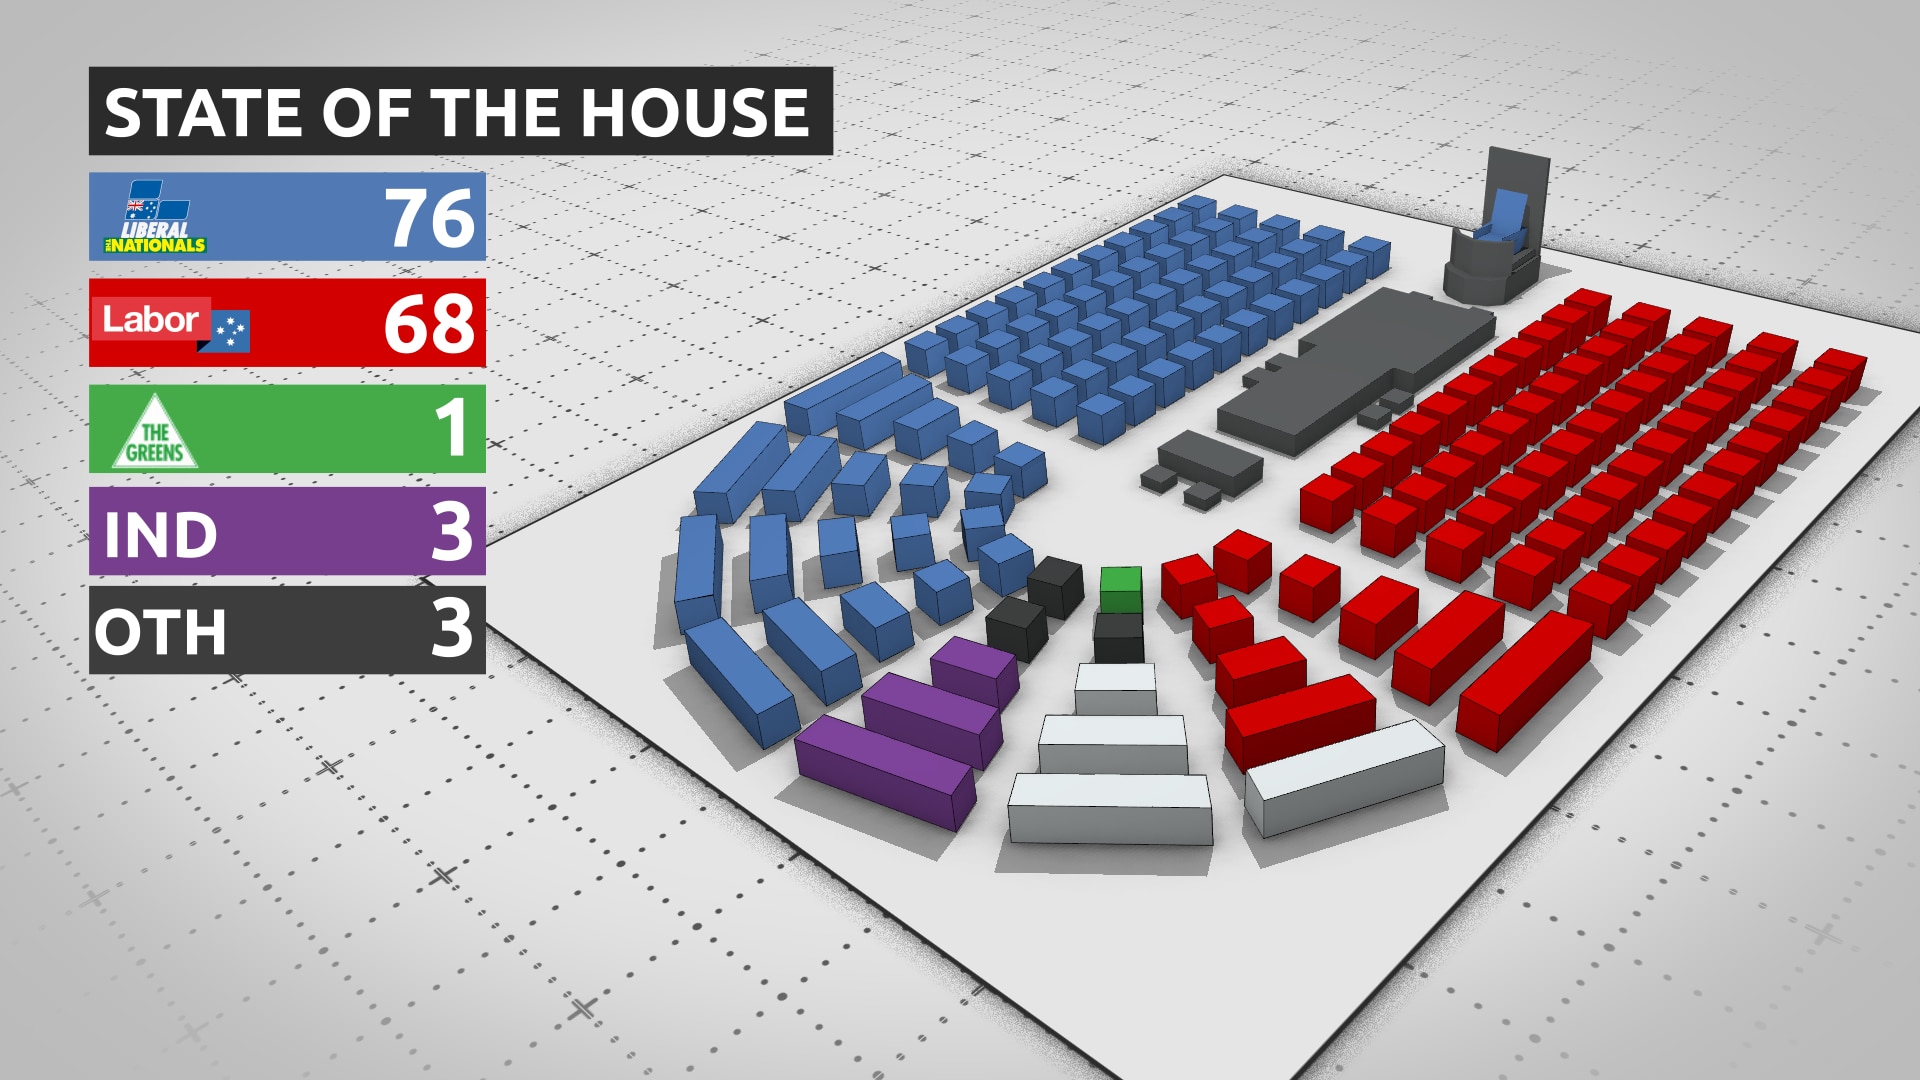 How the 151 seats of the lower house are divided ahead of the 2022 federal election